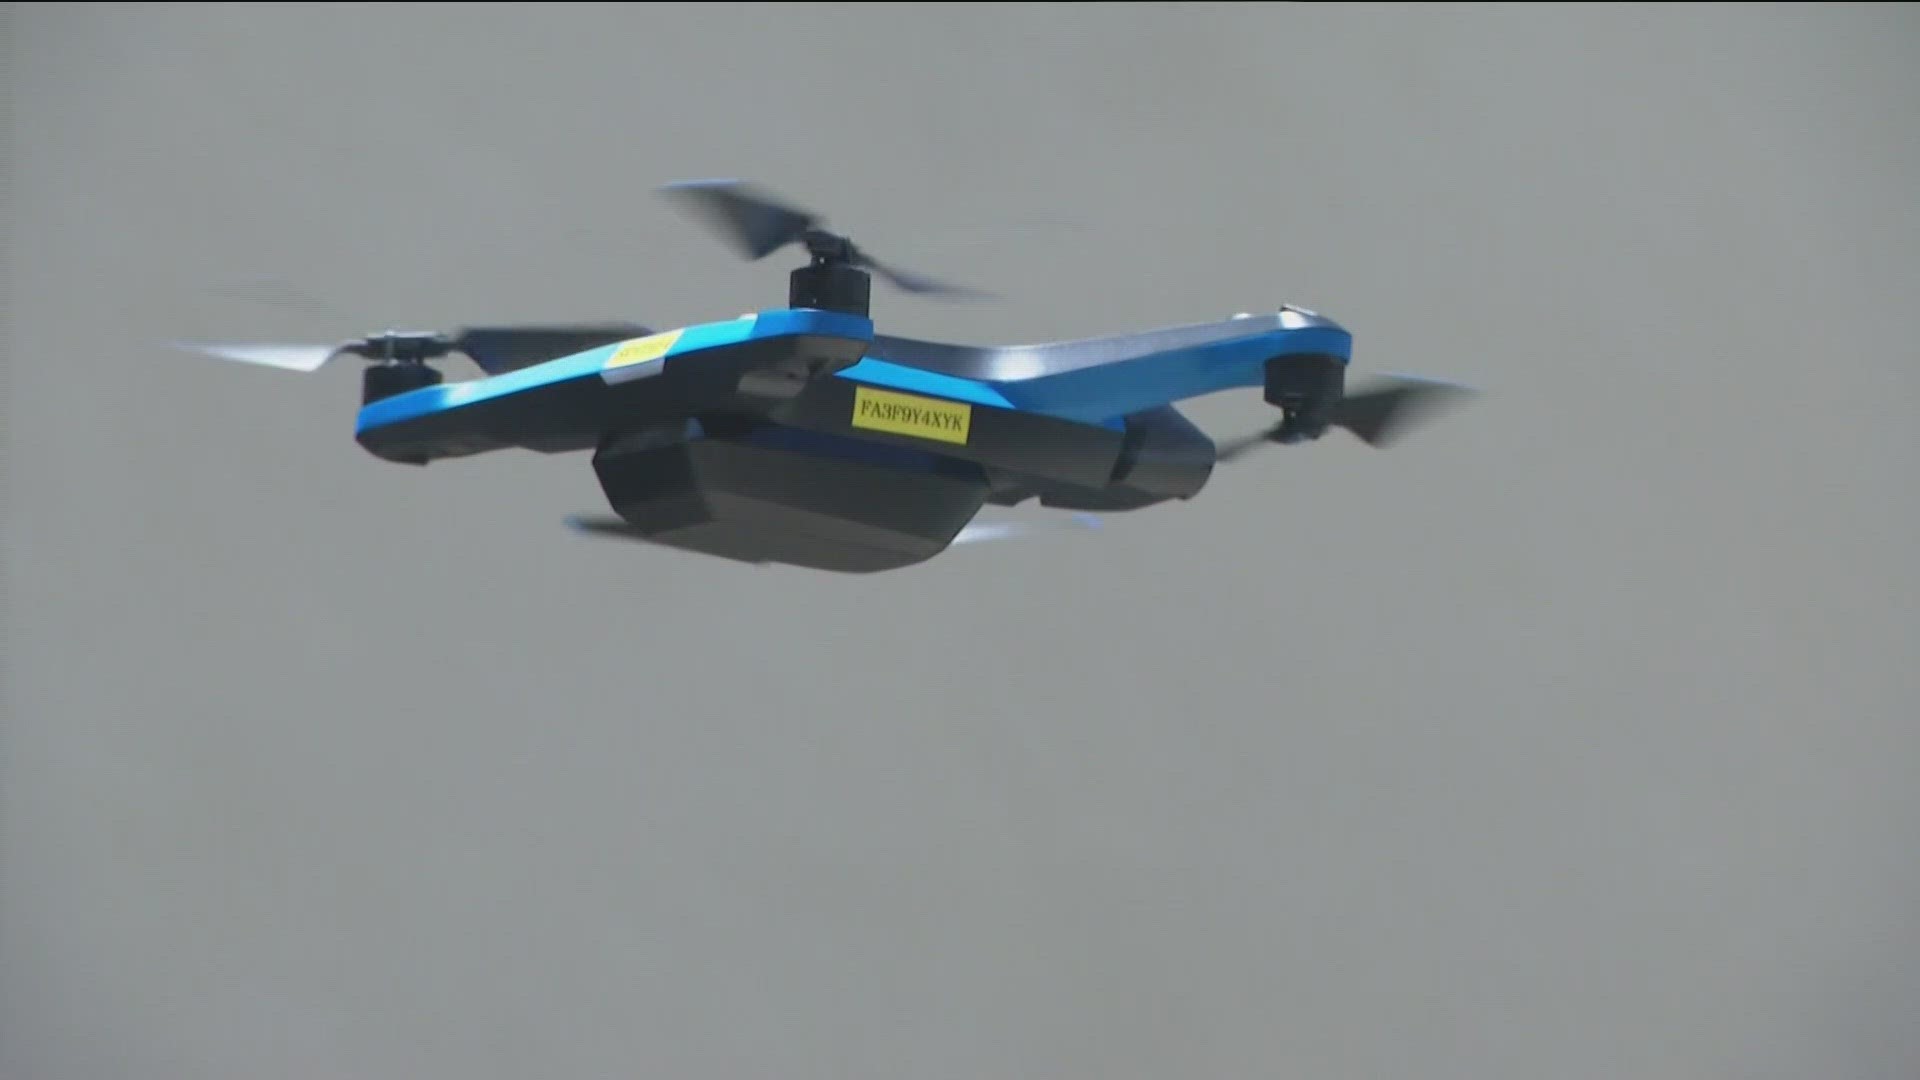 Concerned viewers reached out to CBS 8 after they saw drones take off from Sharp Hospital.